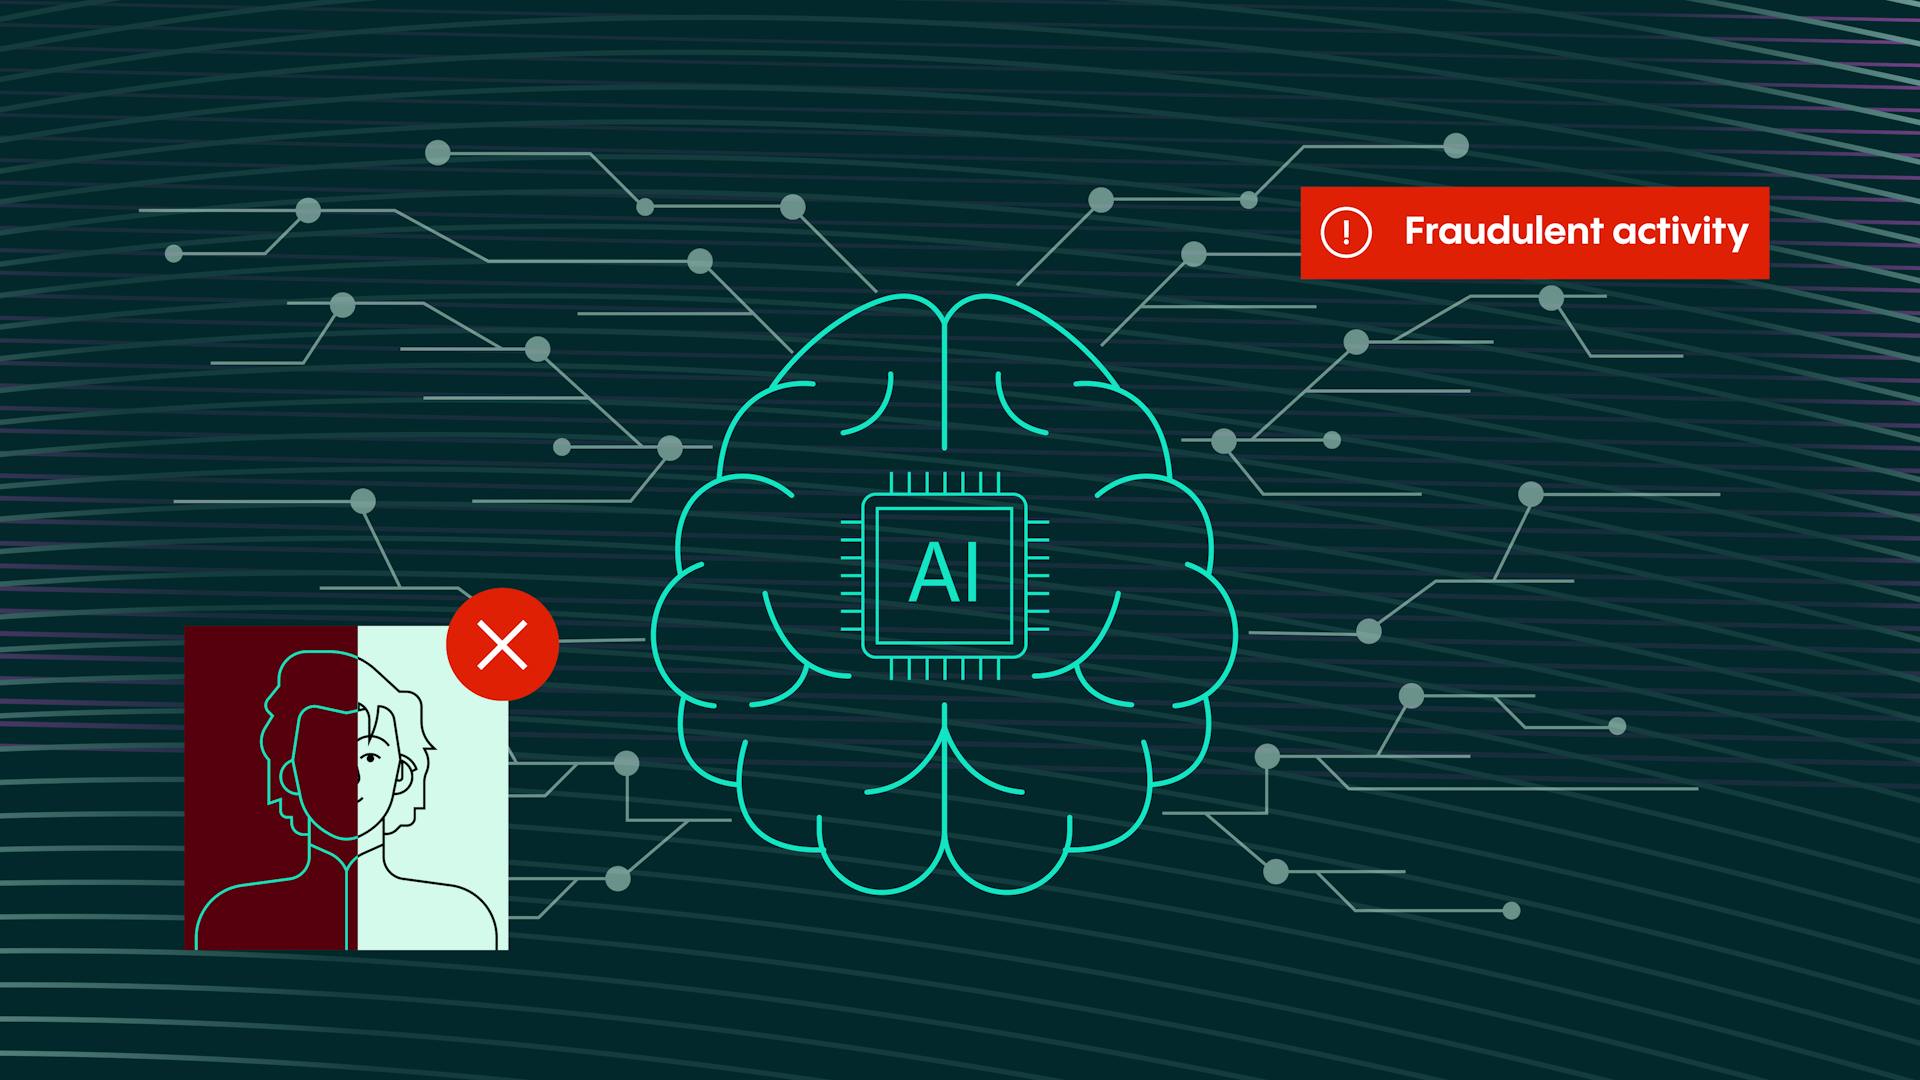 AI brain illustration with network lines, identity verification failure, and fraud alert.